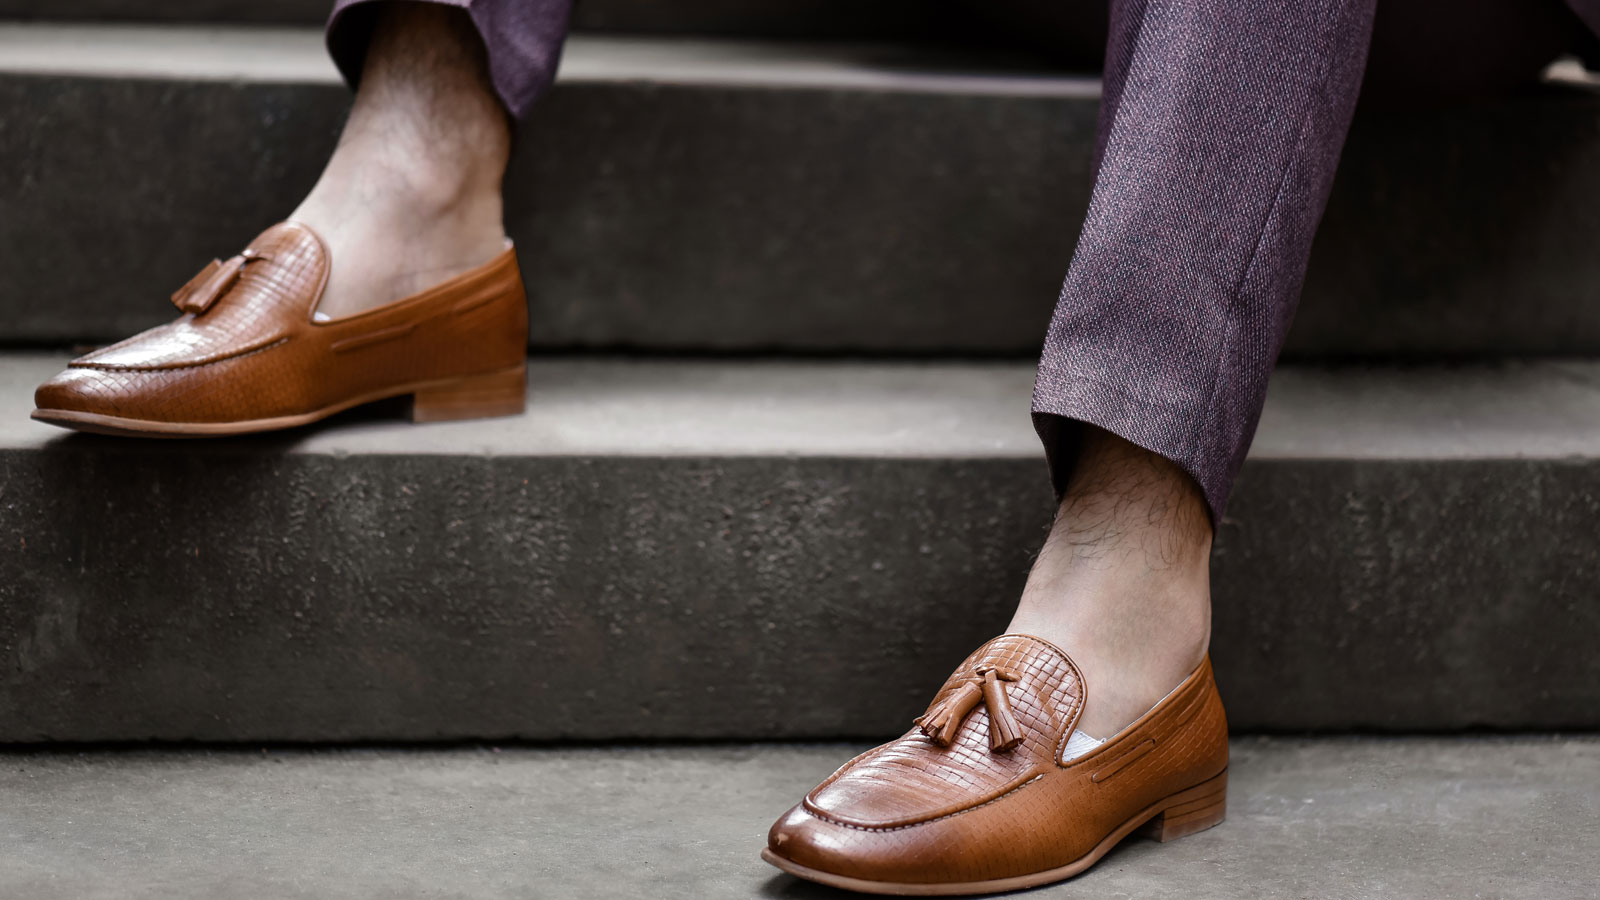 Men's Loafer Guide: Loafer Types, Styles & How To Wear It